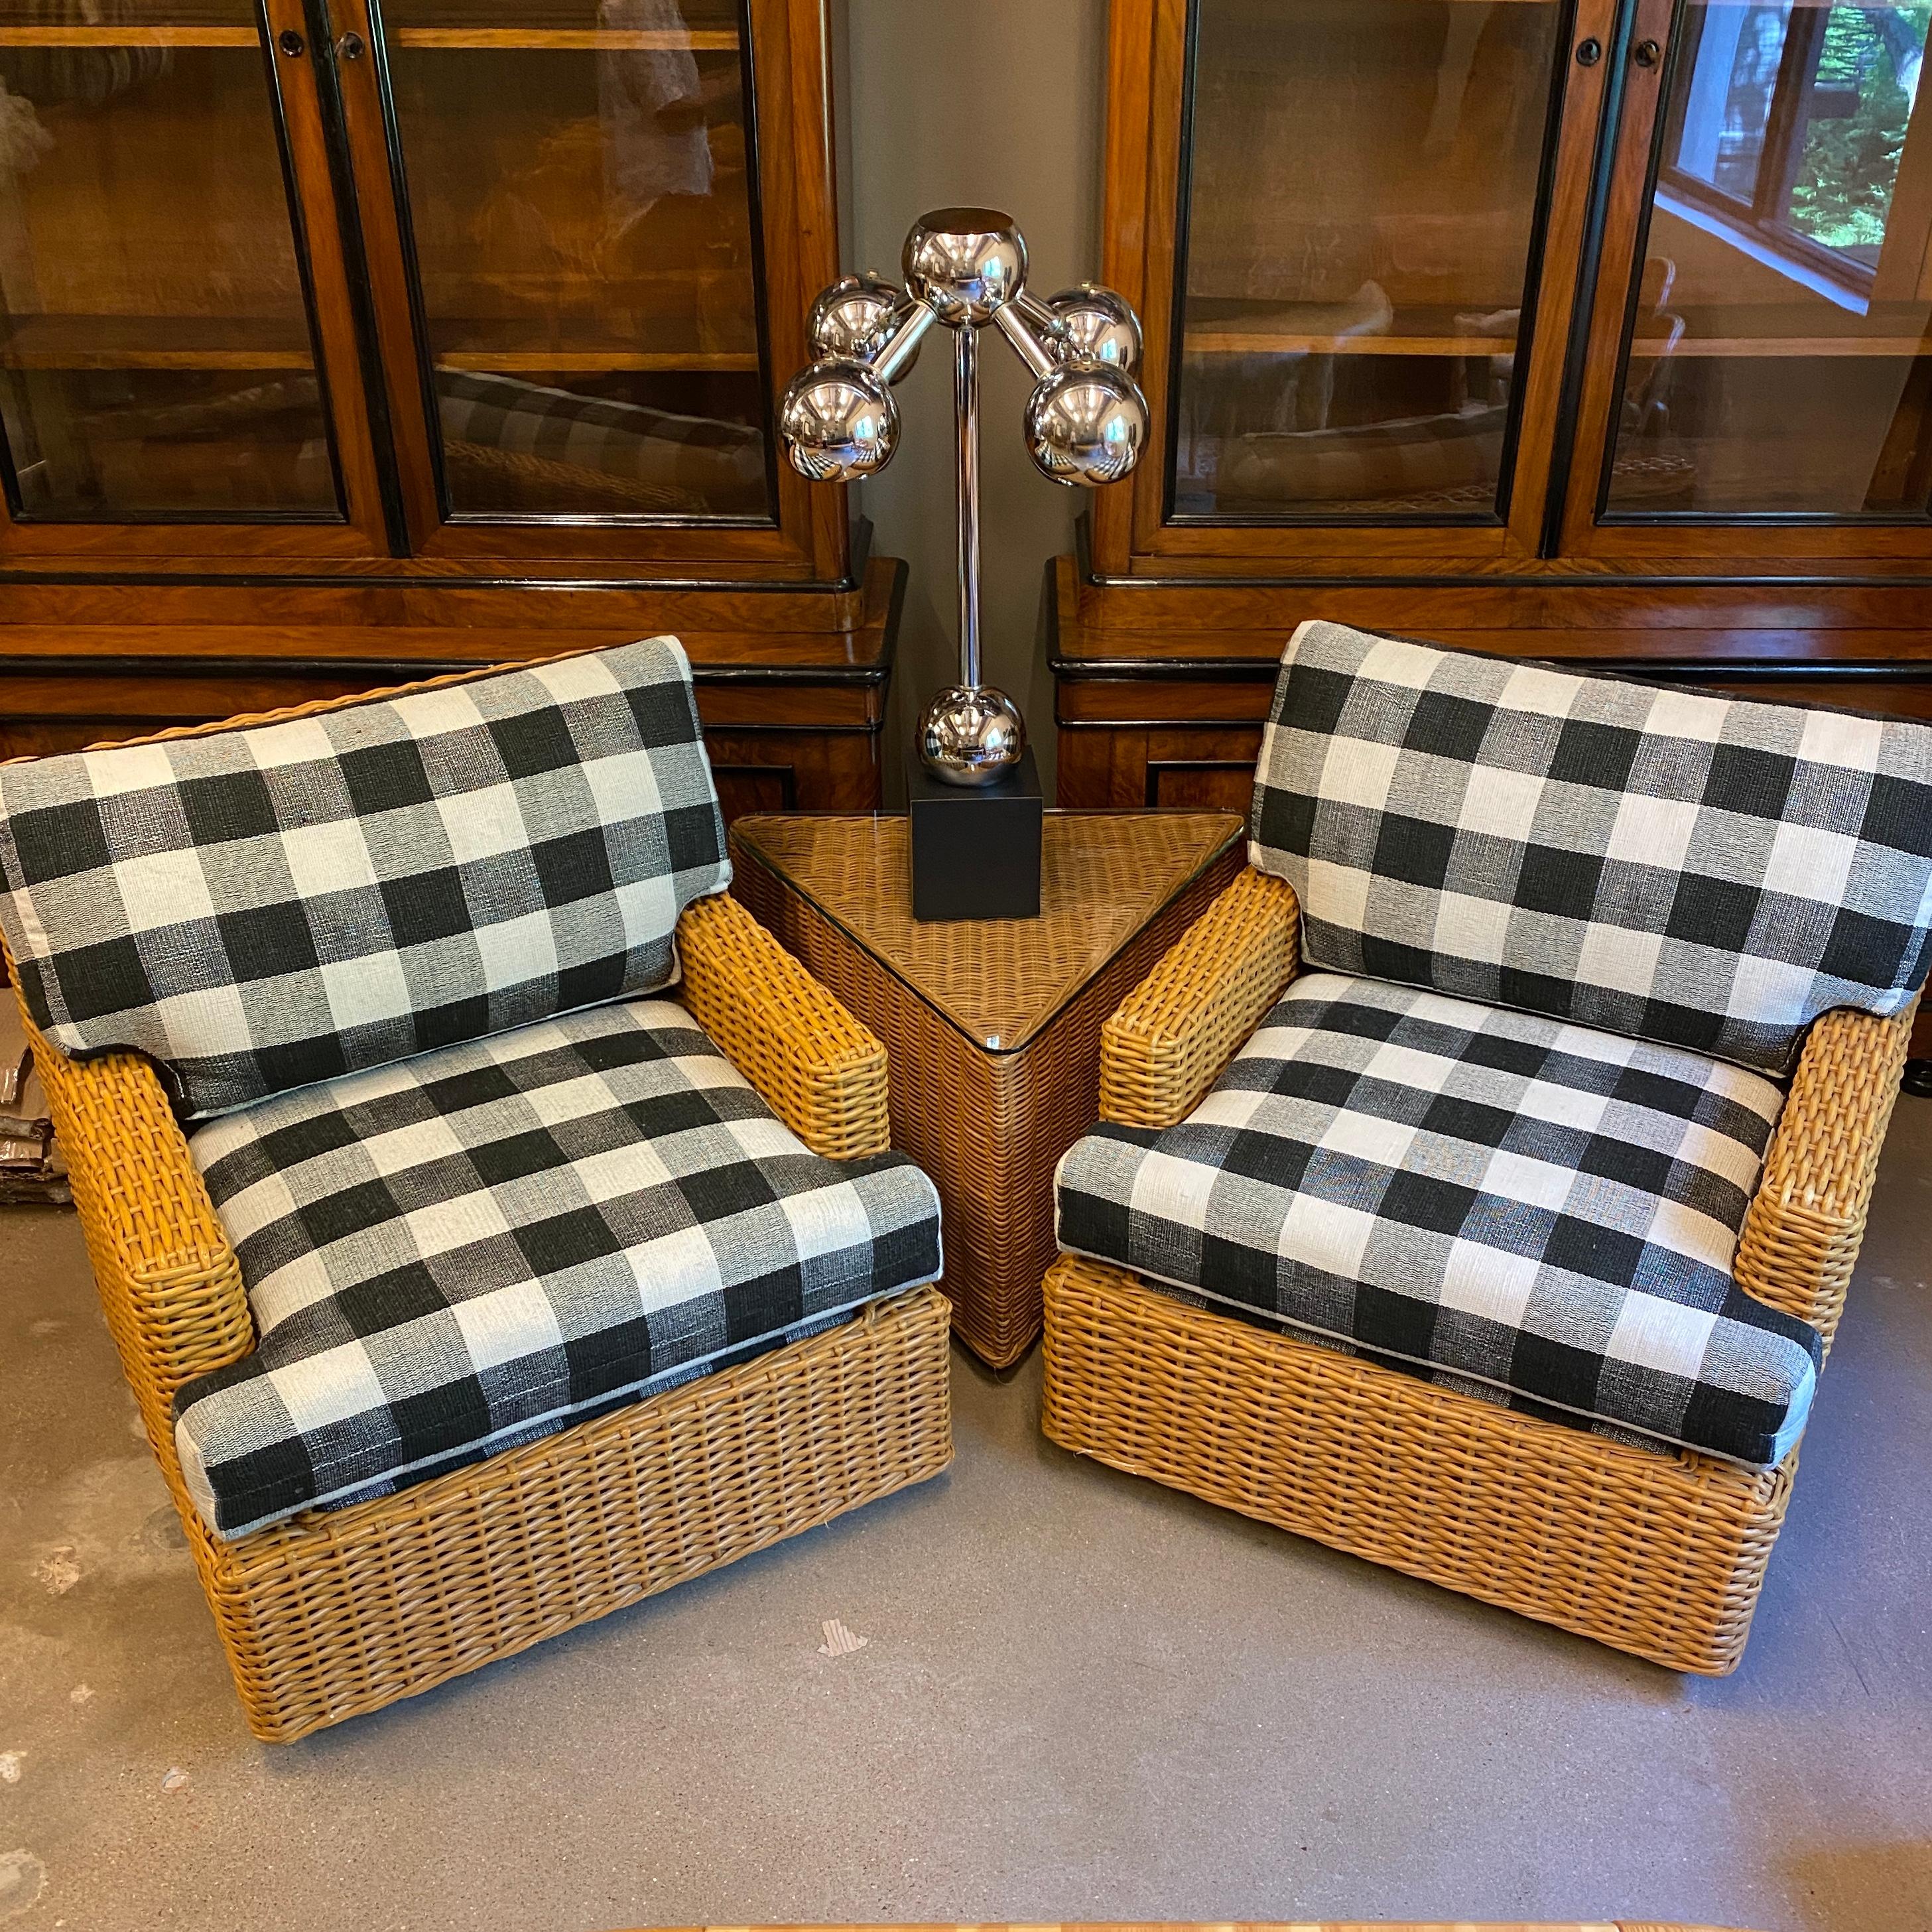 Vintage wicker side tables in triangular shape with glass tops. Two available, sold separately. One piece of glass has chip.

Wicker lounge chairs in image also available at LU1140219356051.